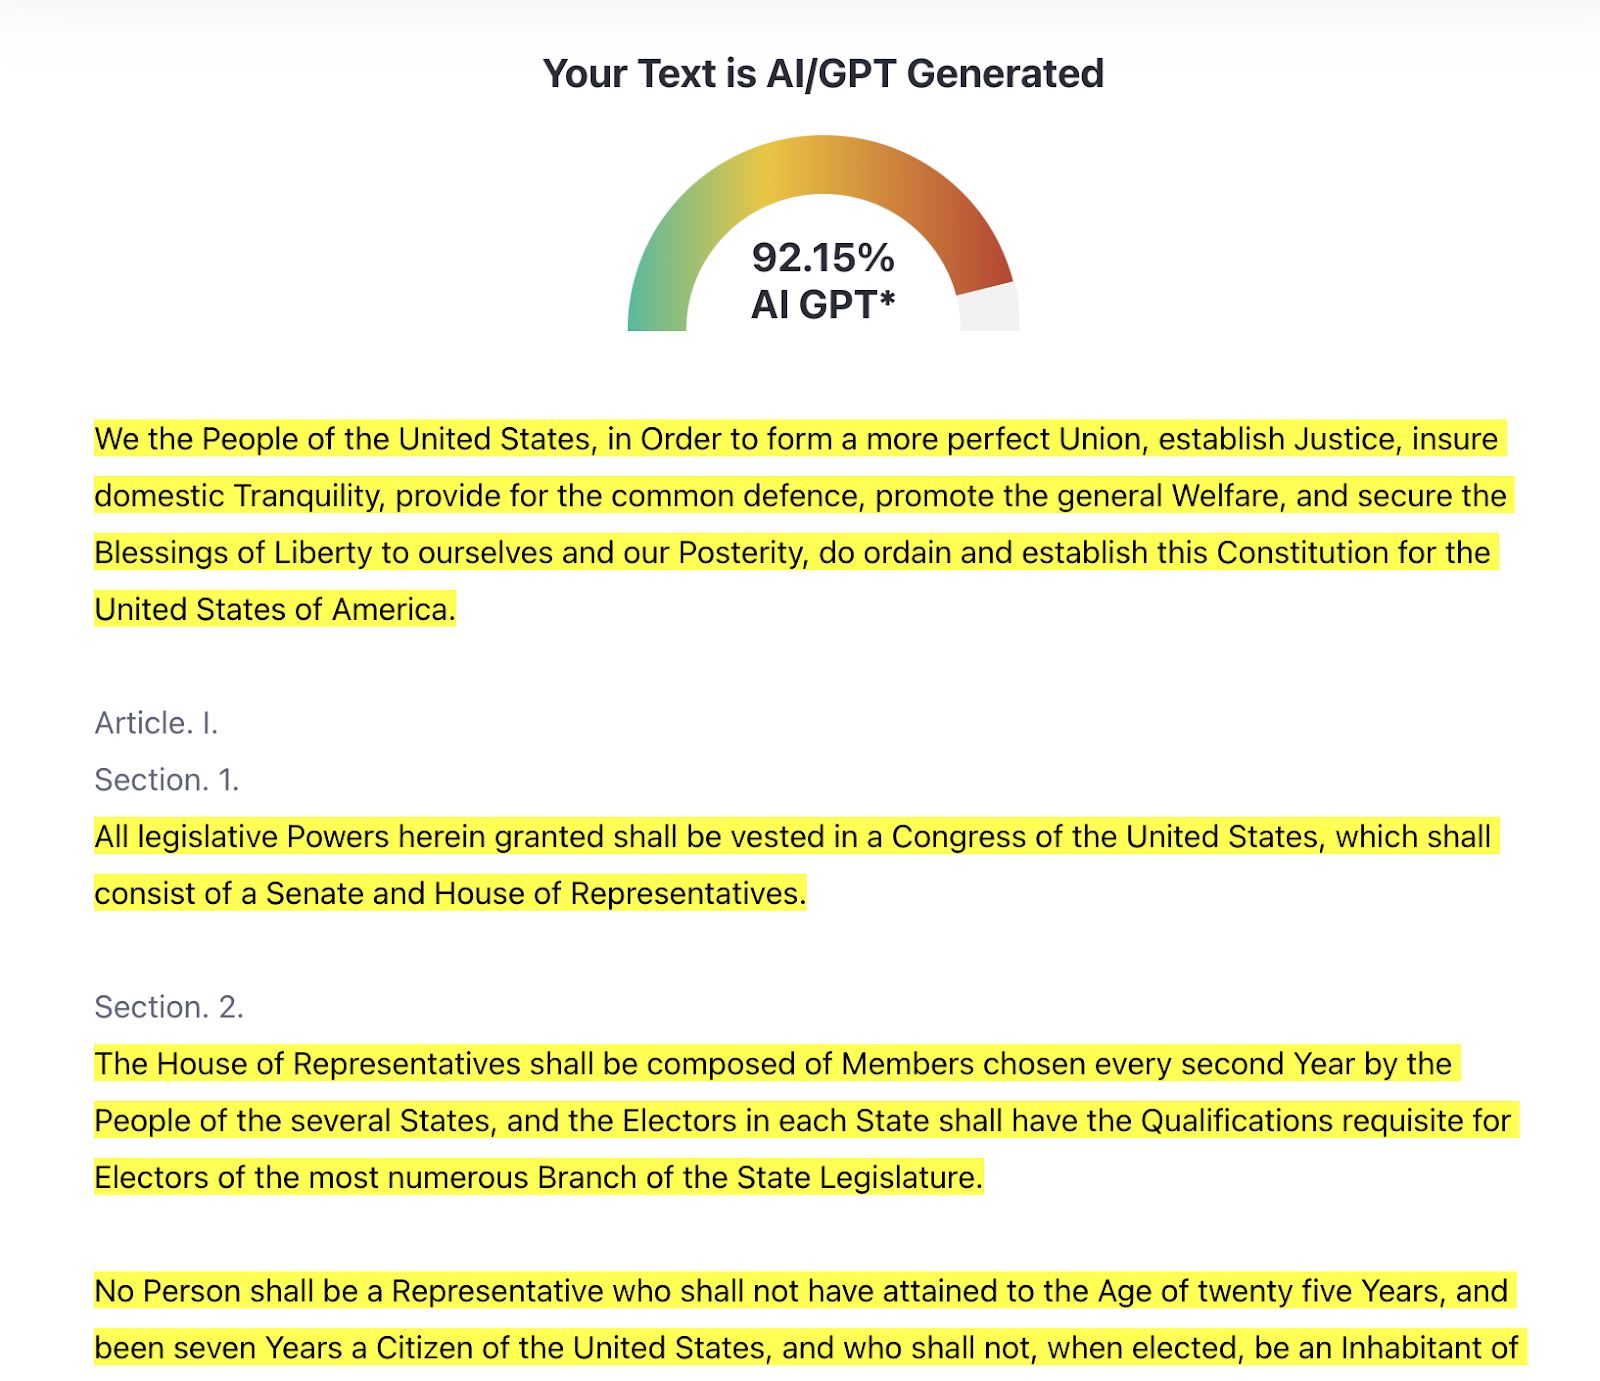 This is a screenshot of ZeroGPT results of the United States Constitution. ZeroGPT said the text was AI/GPT generated with a 92.15%. 